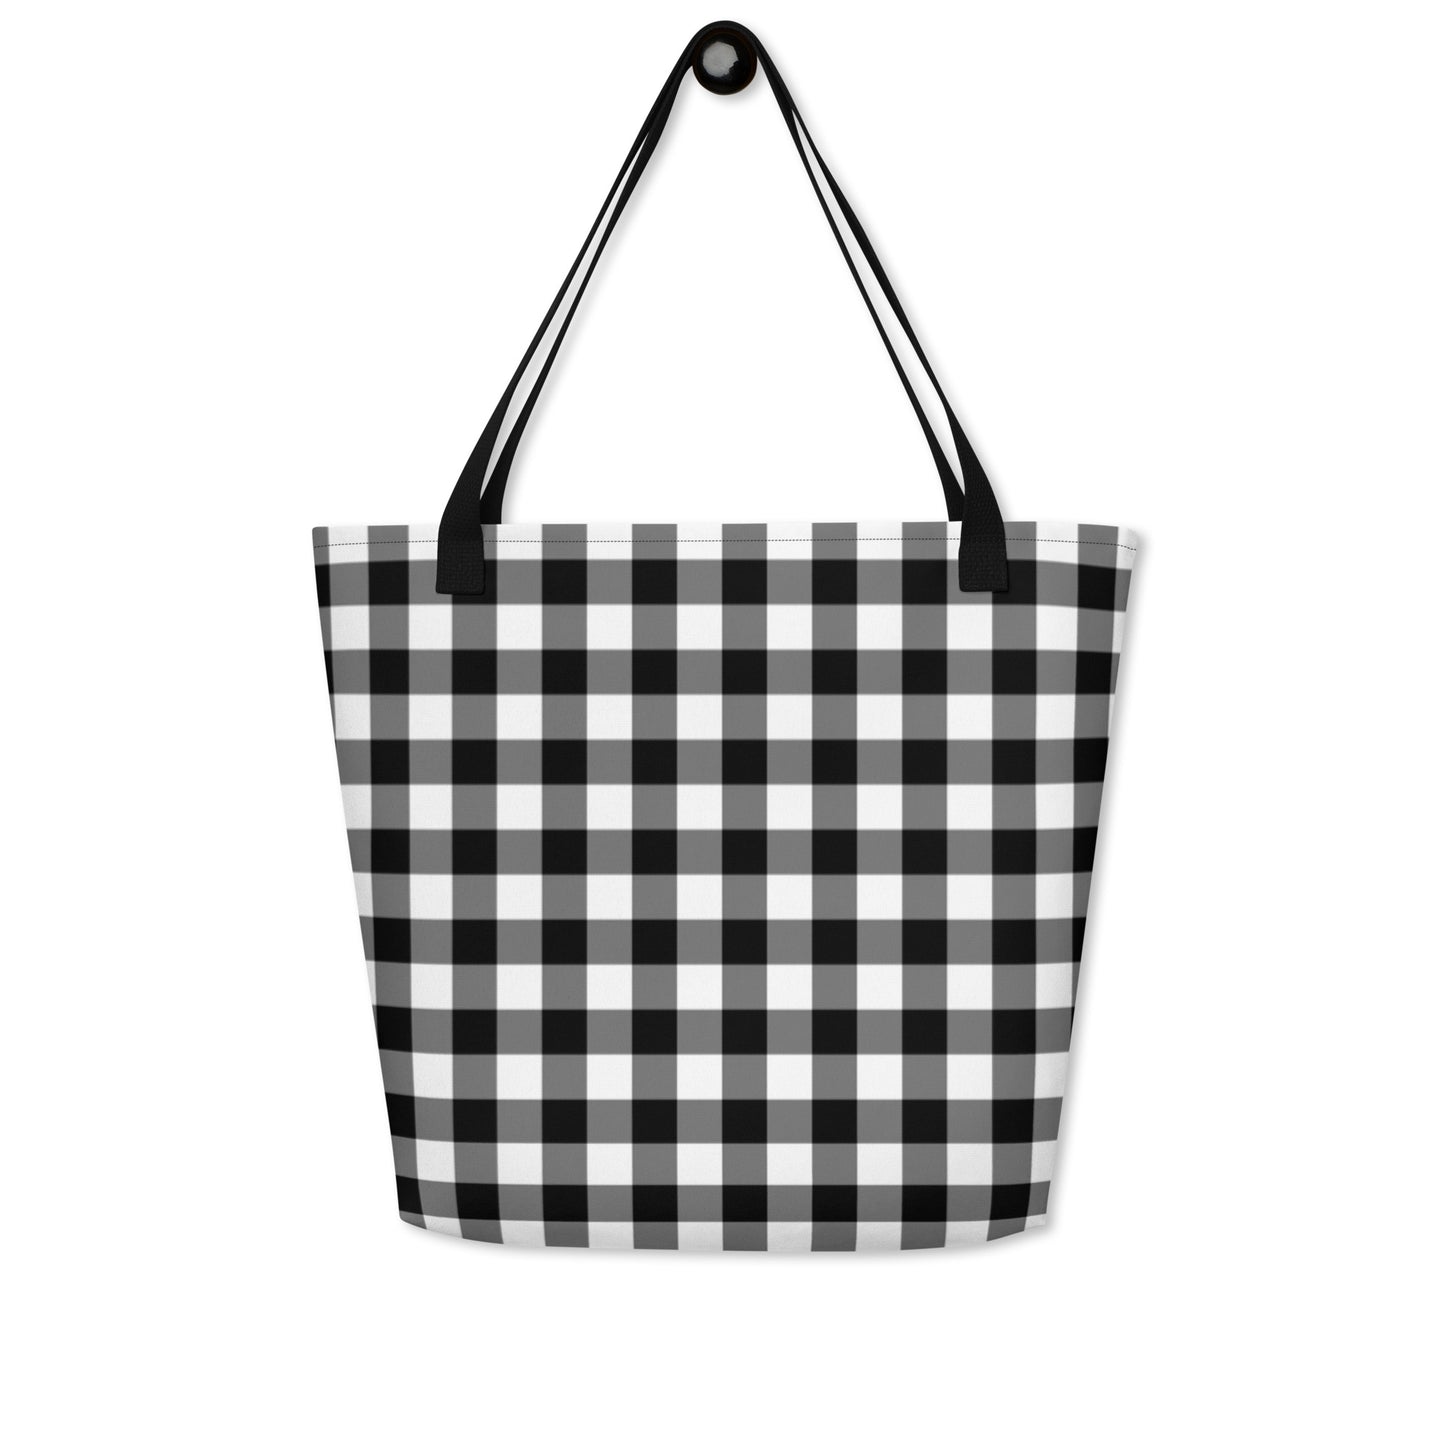 Sunny Days Large Shopper Tote Bag in Black Gingham | Pinup Couture